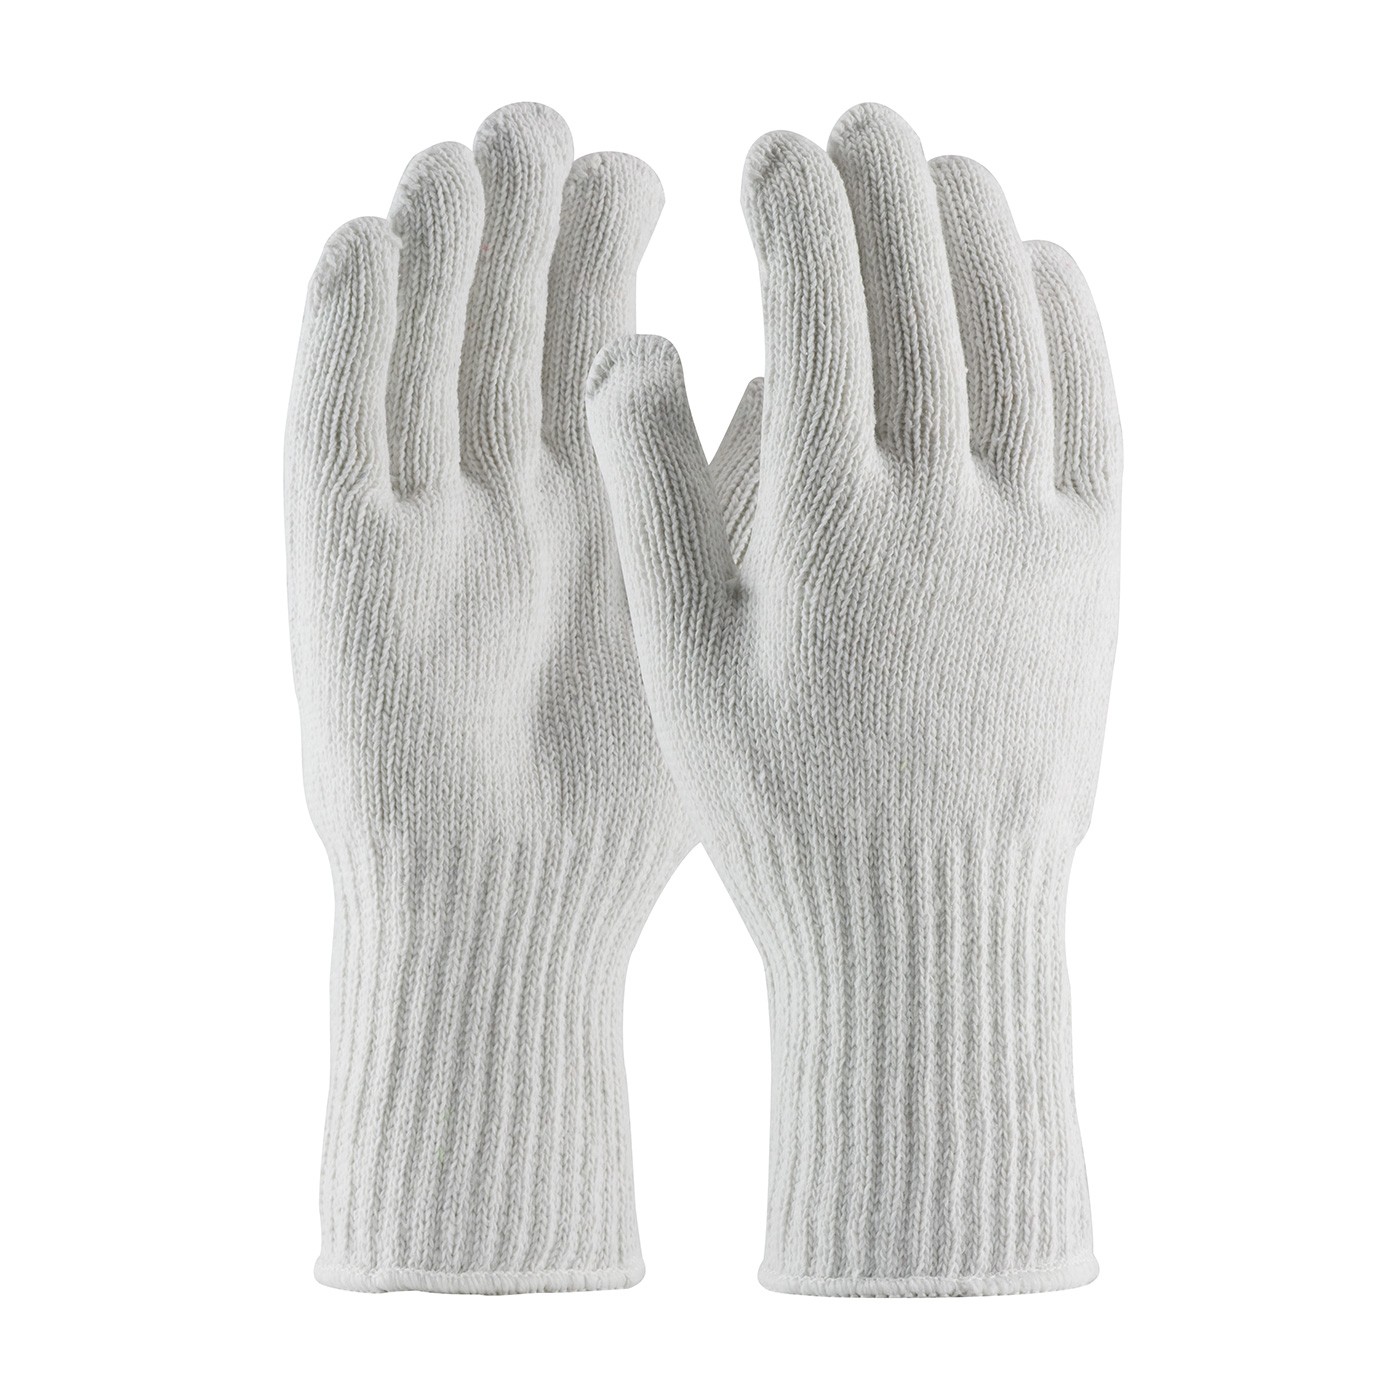 PIP® Extra Heavy Weight Seamless Knit Cotton/Polyester Glove - White with Extended Cuff  (#35-CB604)